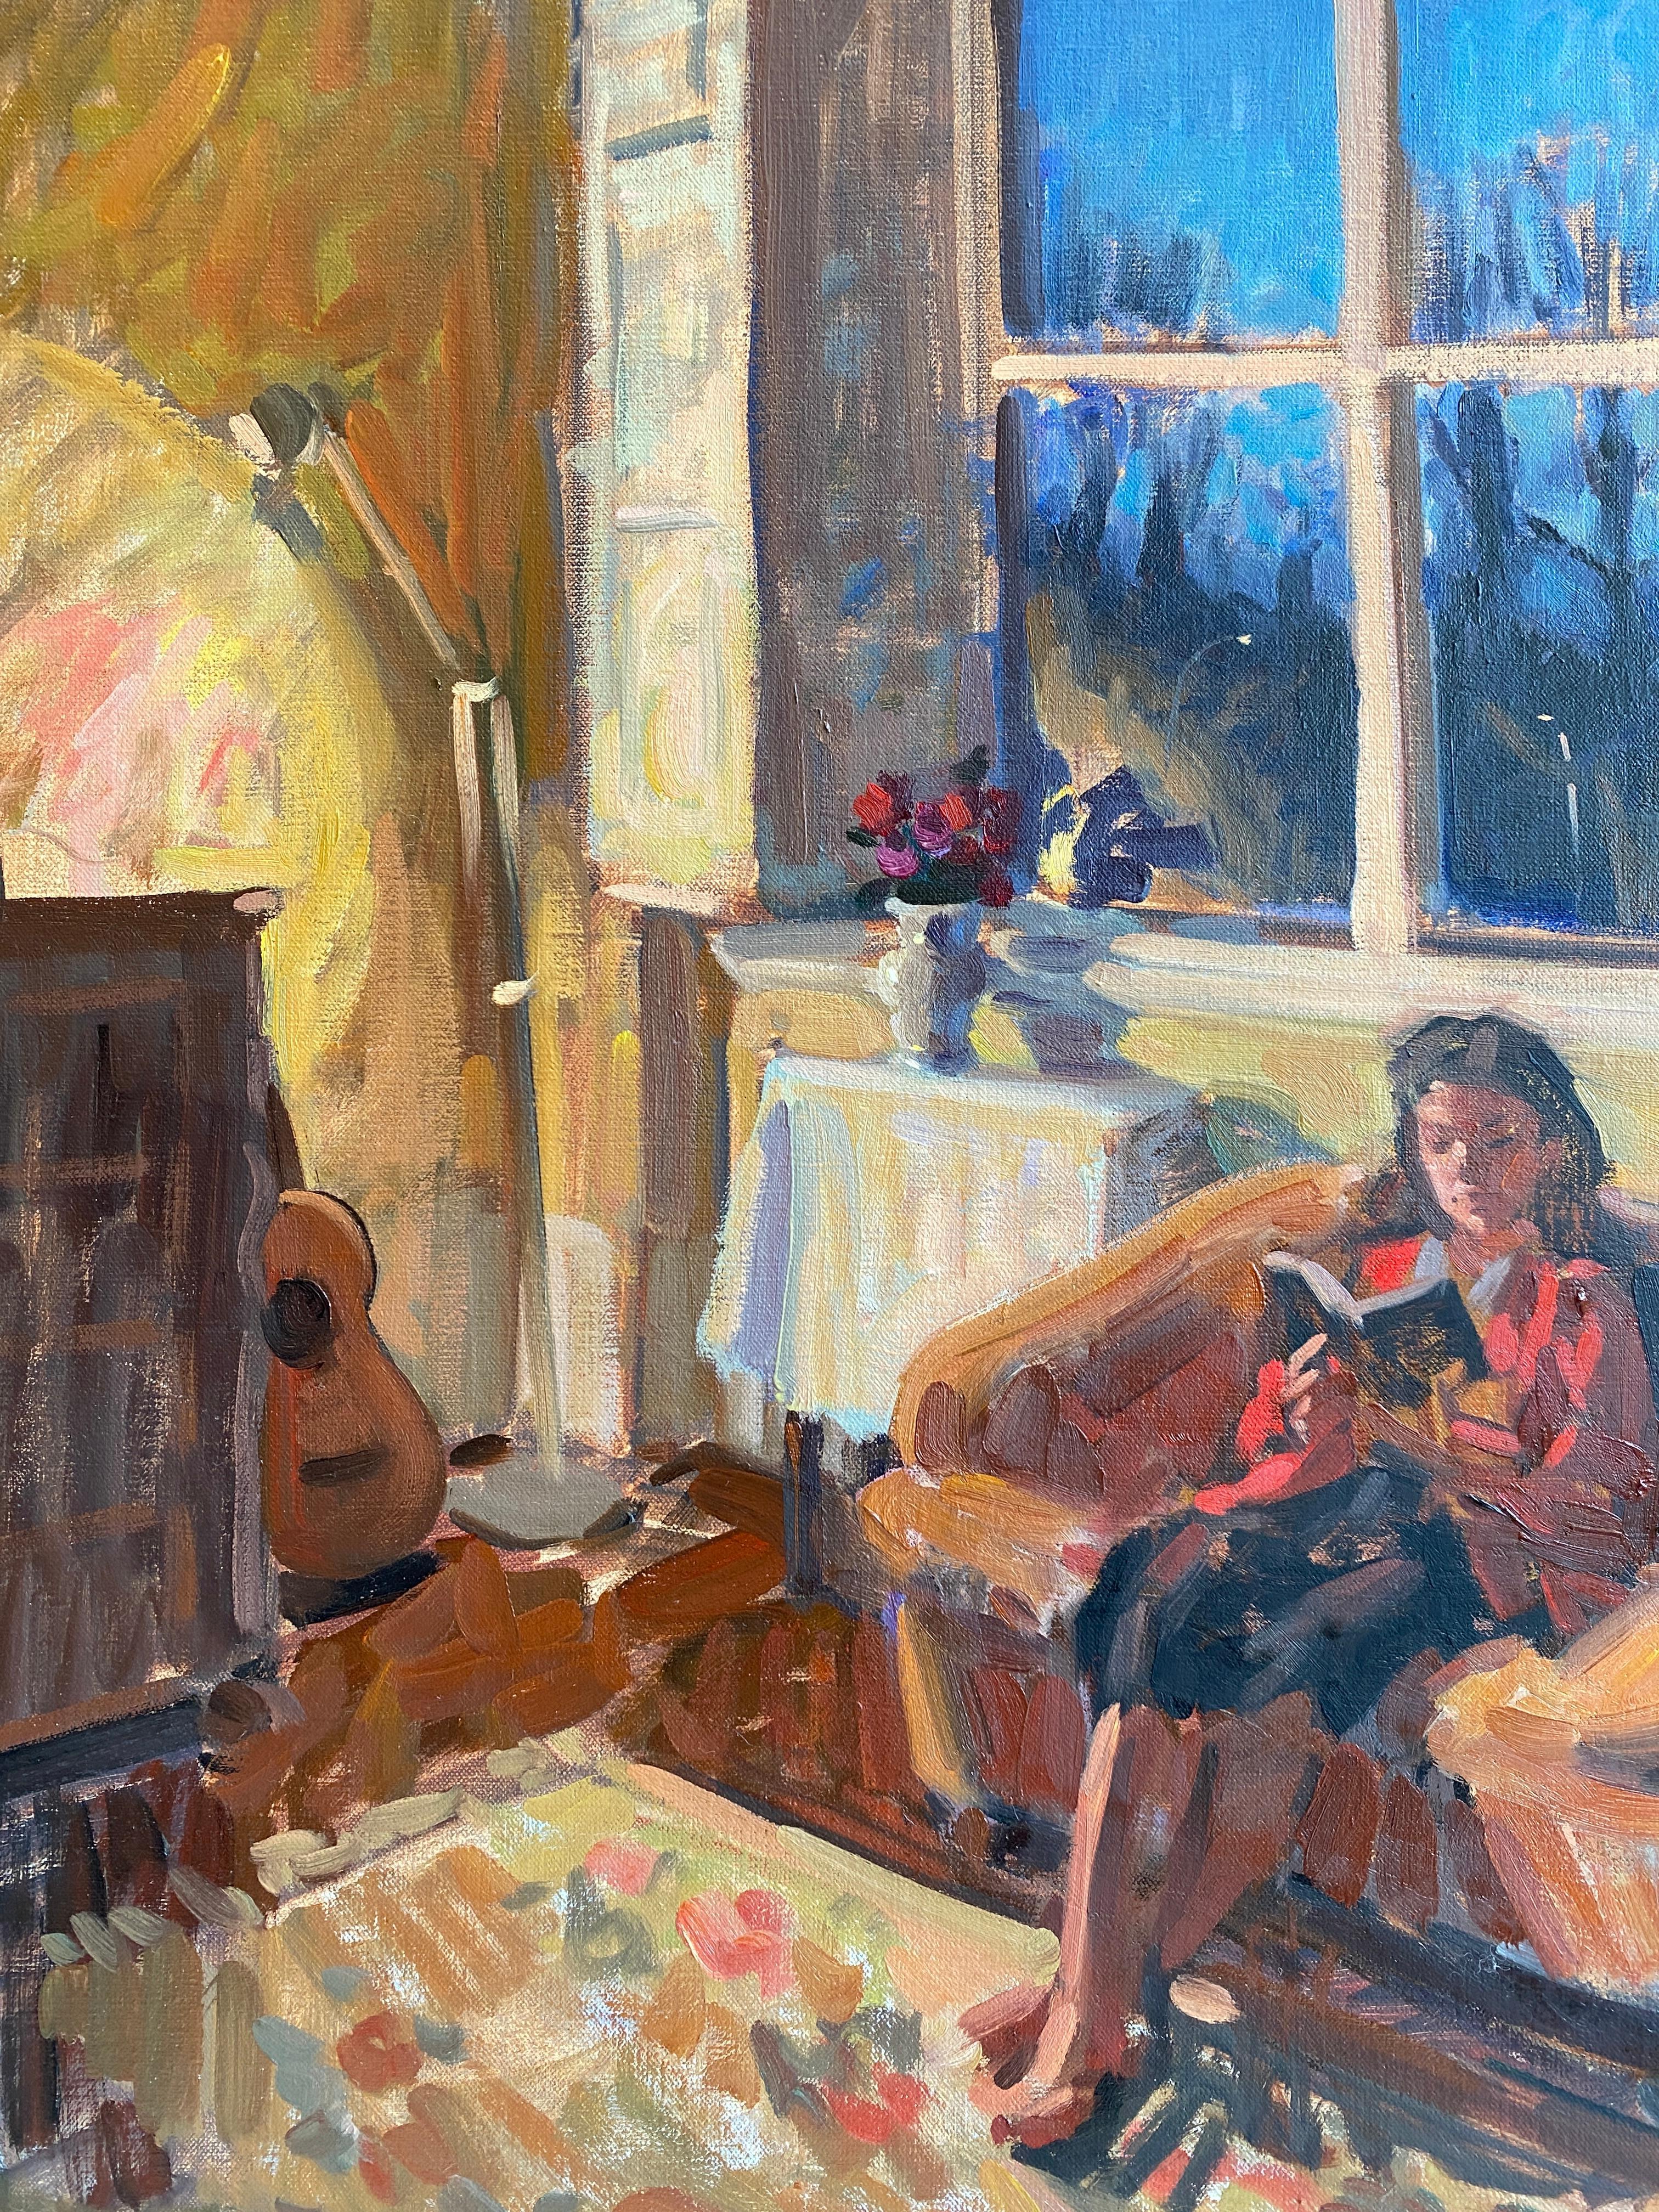 A contemporary impressionist interior of a girl reading at twilight. Florence depicts a serene moment in her cozy studio. This is one of her few figural paintings, but one of her recognizable floral still lifes is visible next to the reading woman.